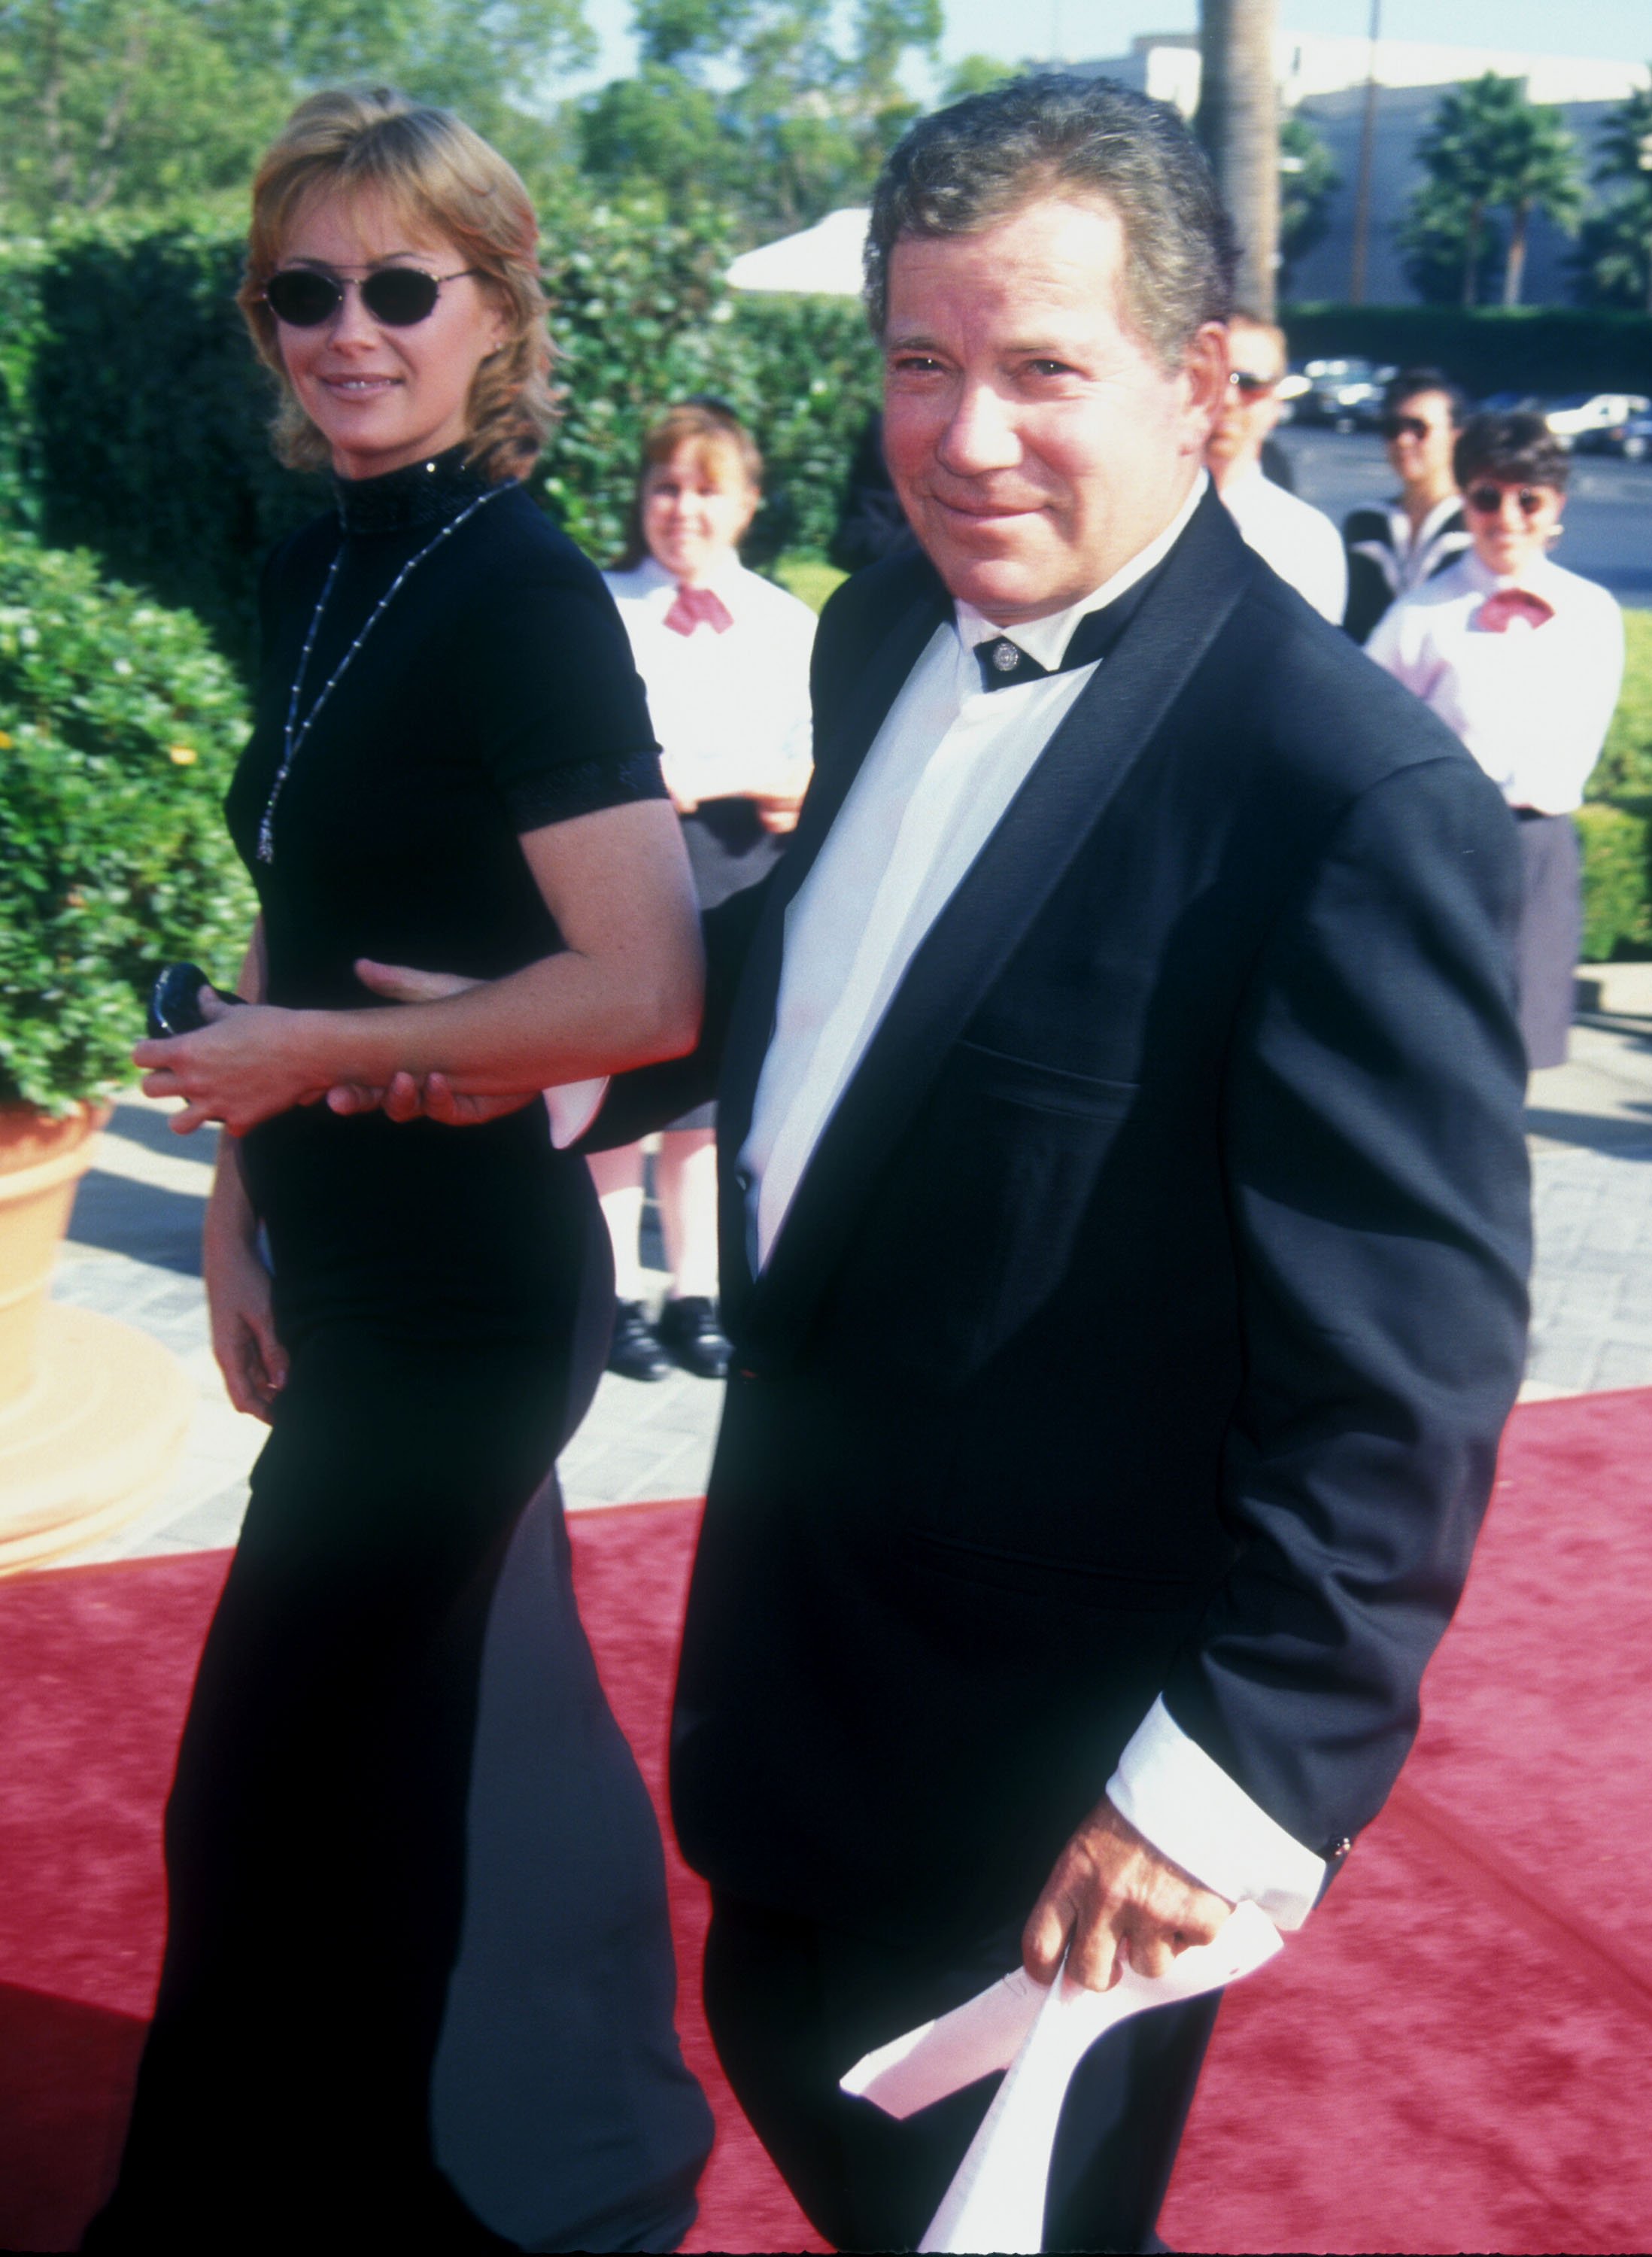 Nerine Kidd and William Shatner during "Star Trek: 30 Years and Beyond - A Live Tribute" at Paramount Studios, in Los Angeles, California, United States, on October 6, 1996. | Source: Getty Images